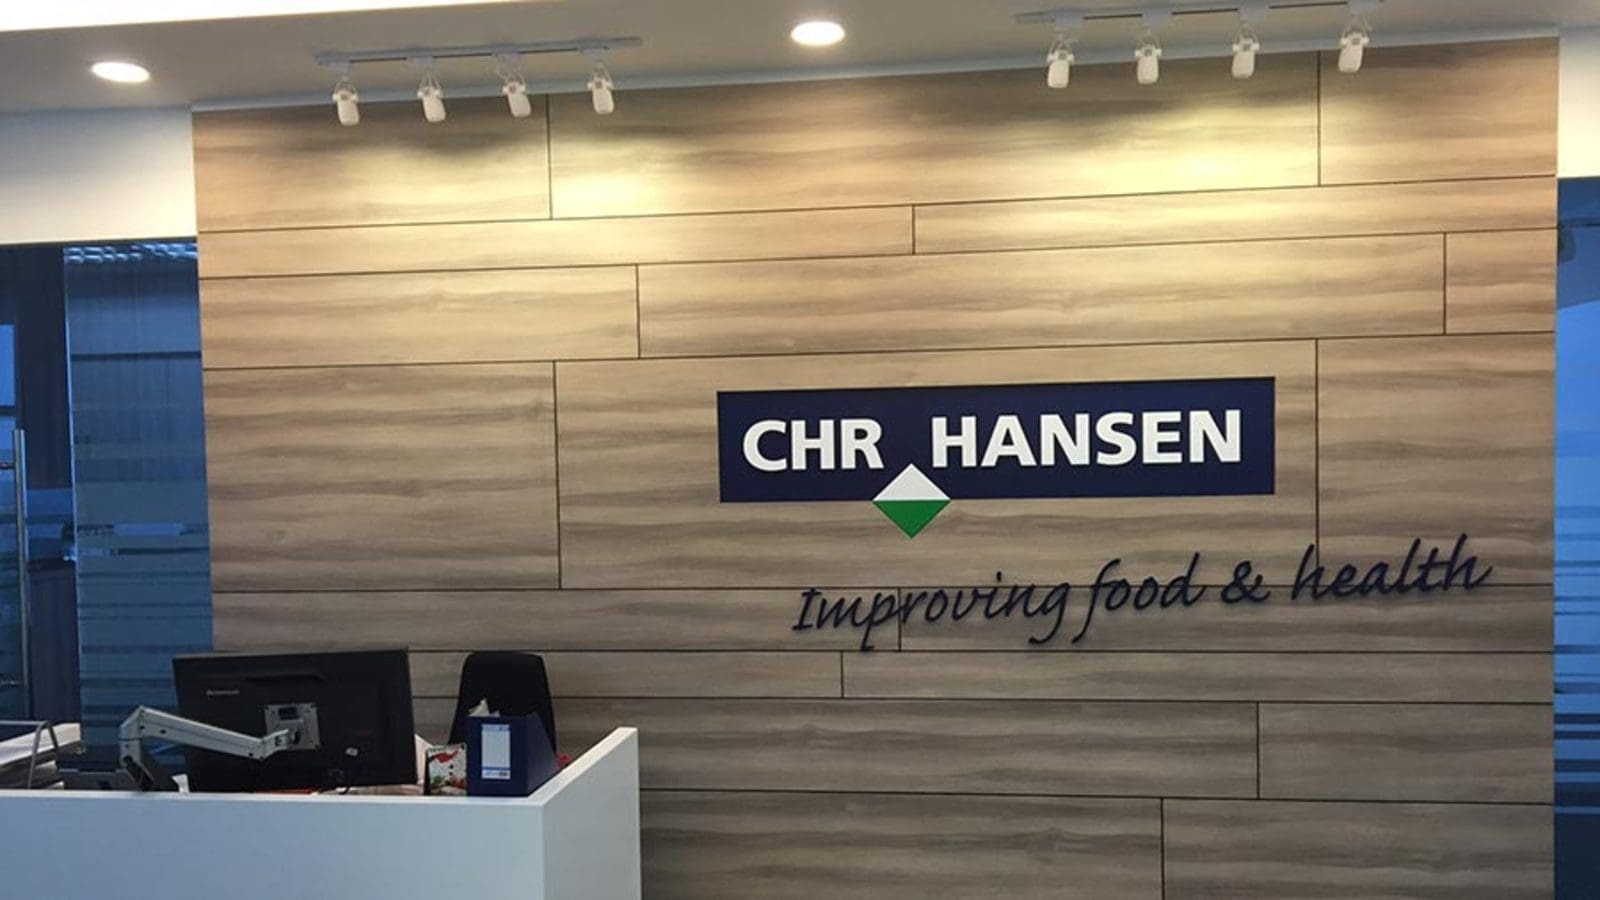 Chr. Hansen reports 13% growth in Full Year 2022 revenue despite volatile macroeconomic and geopolitical environment